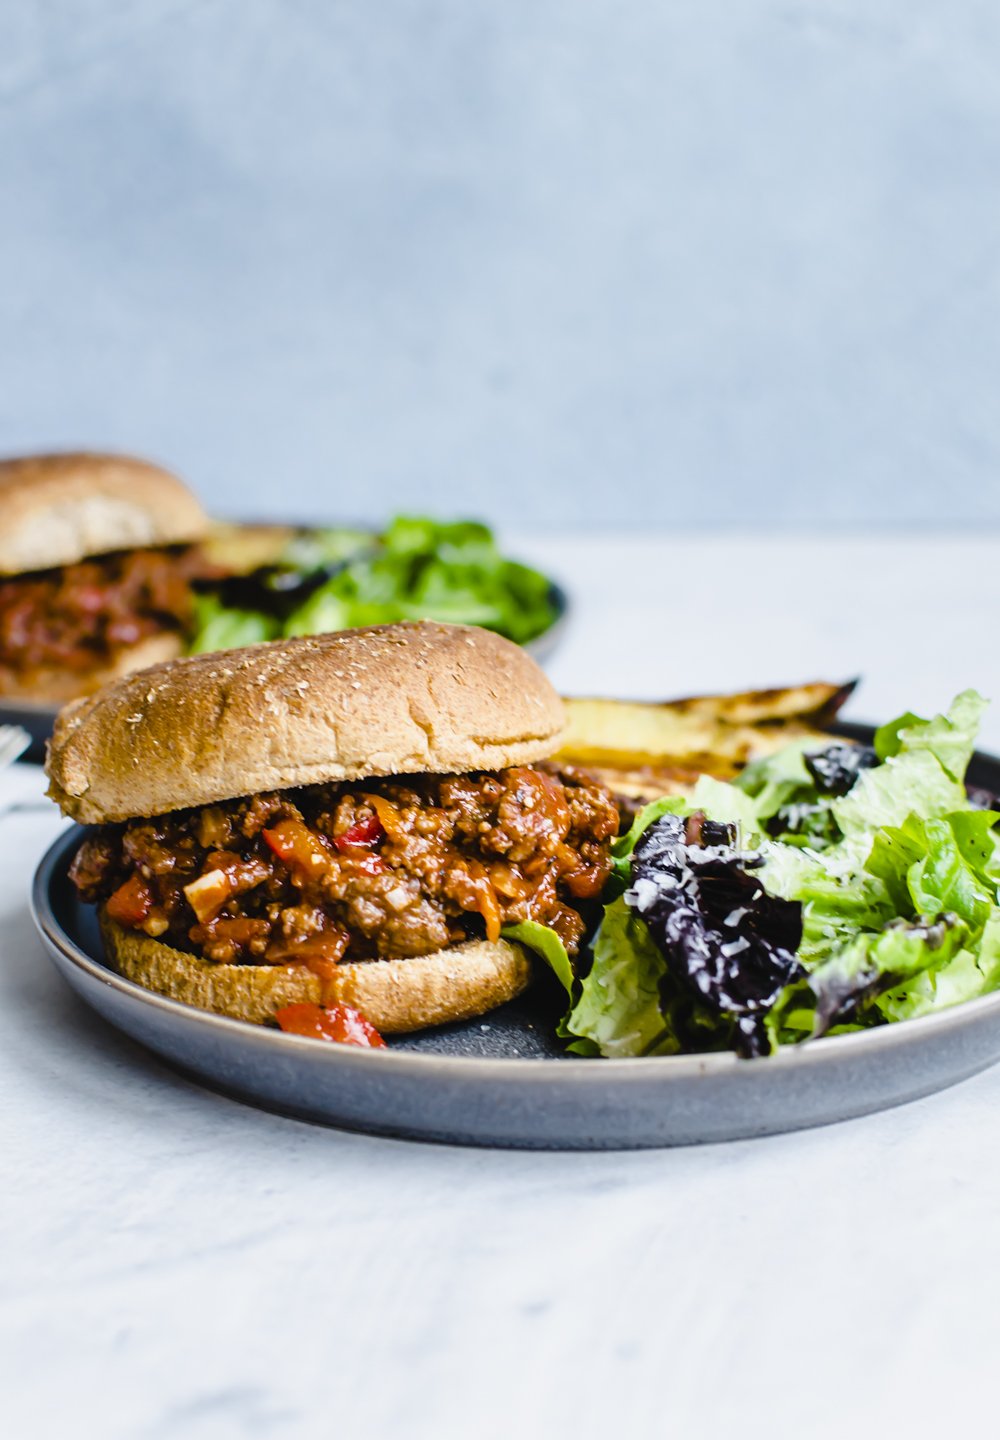 Homemade sloppy joes on a plate with salad.